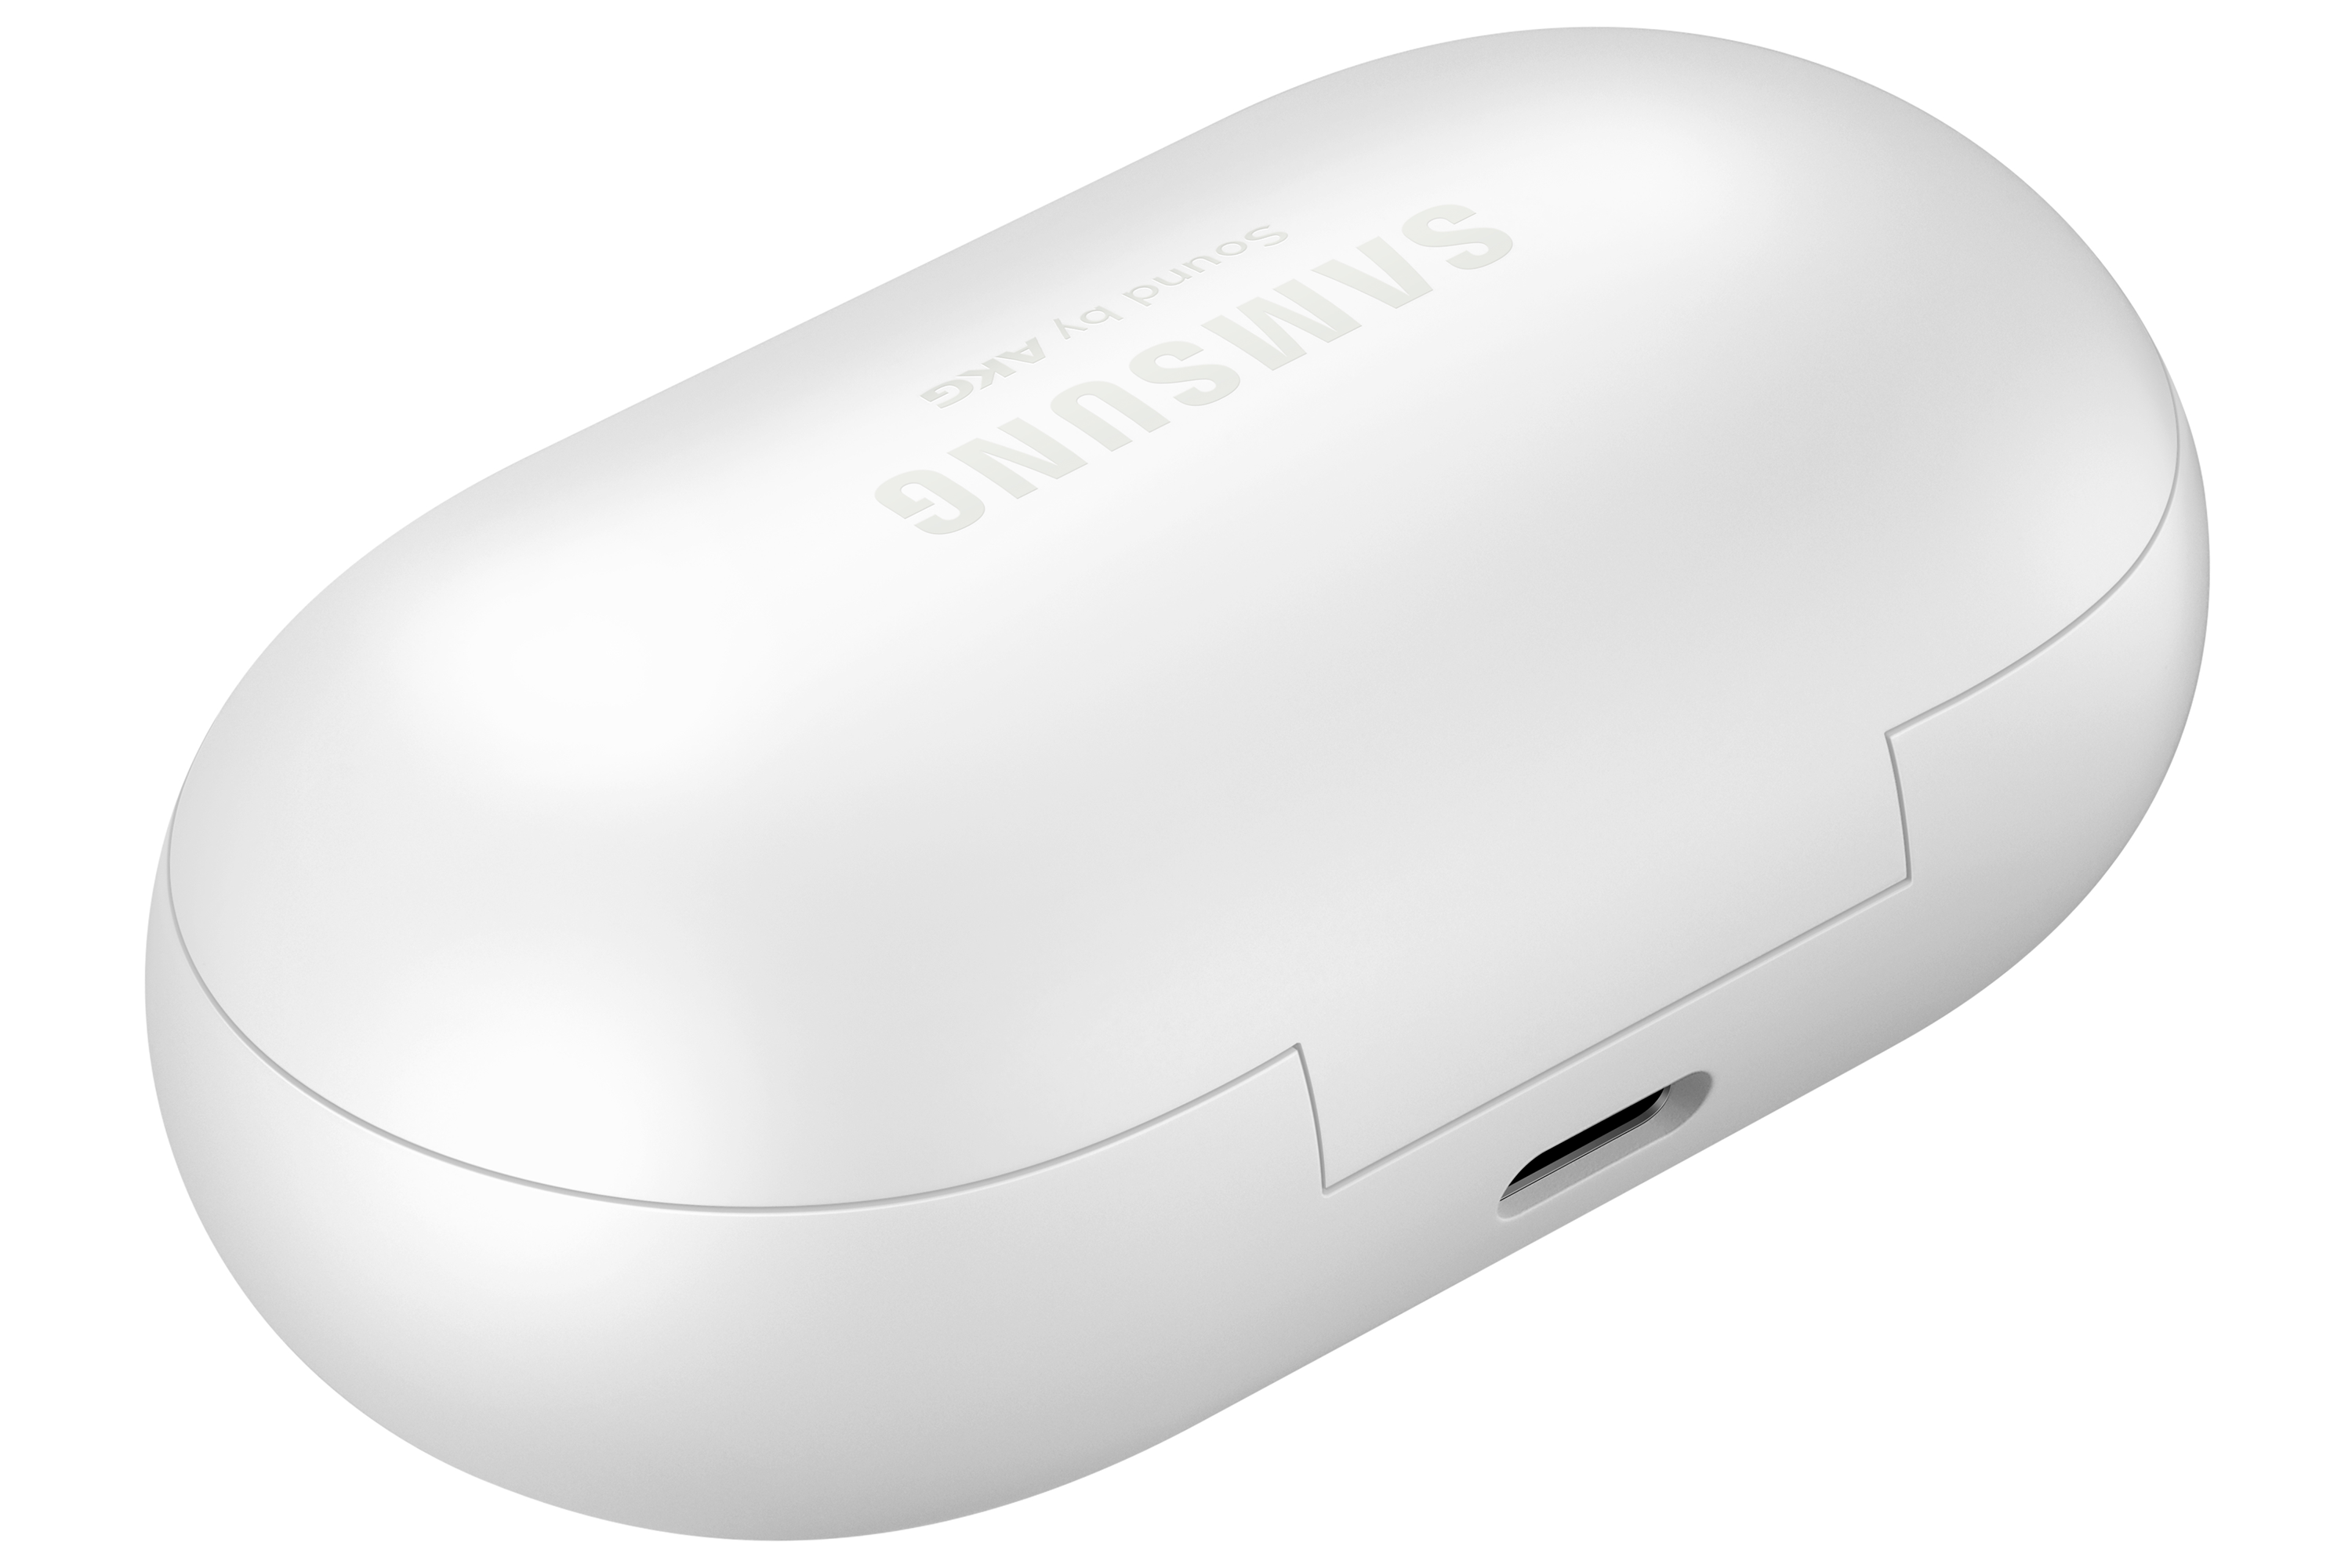 SAMSUNG Galaxy Buds, White (Charging Case Included) - image 8 of 17